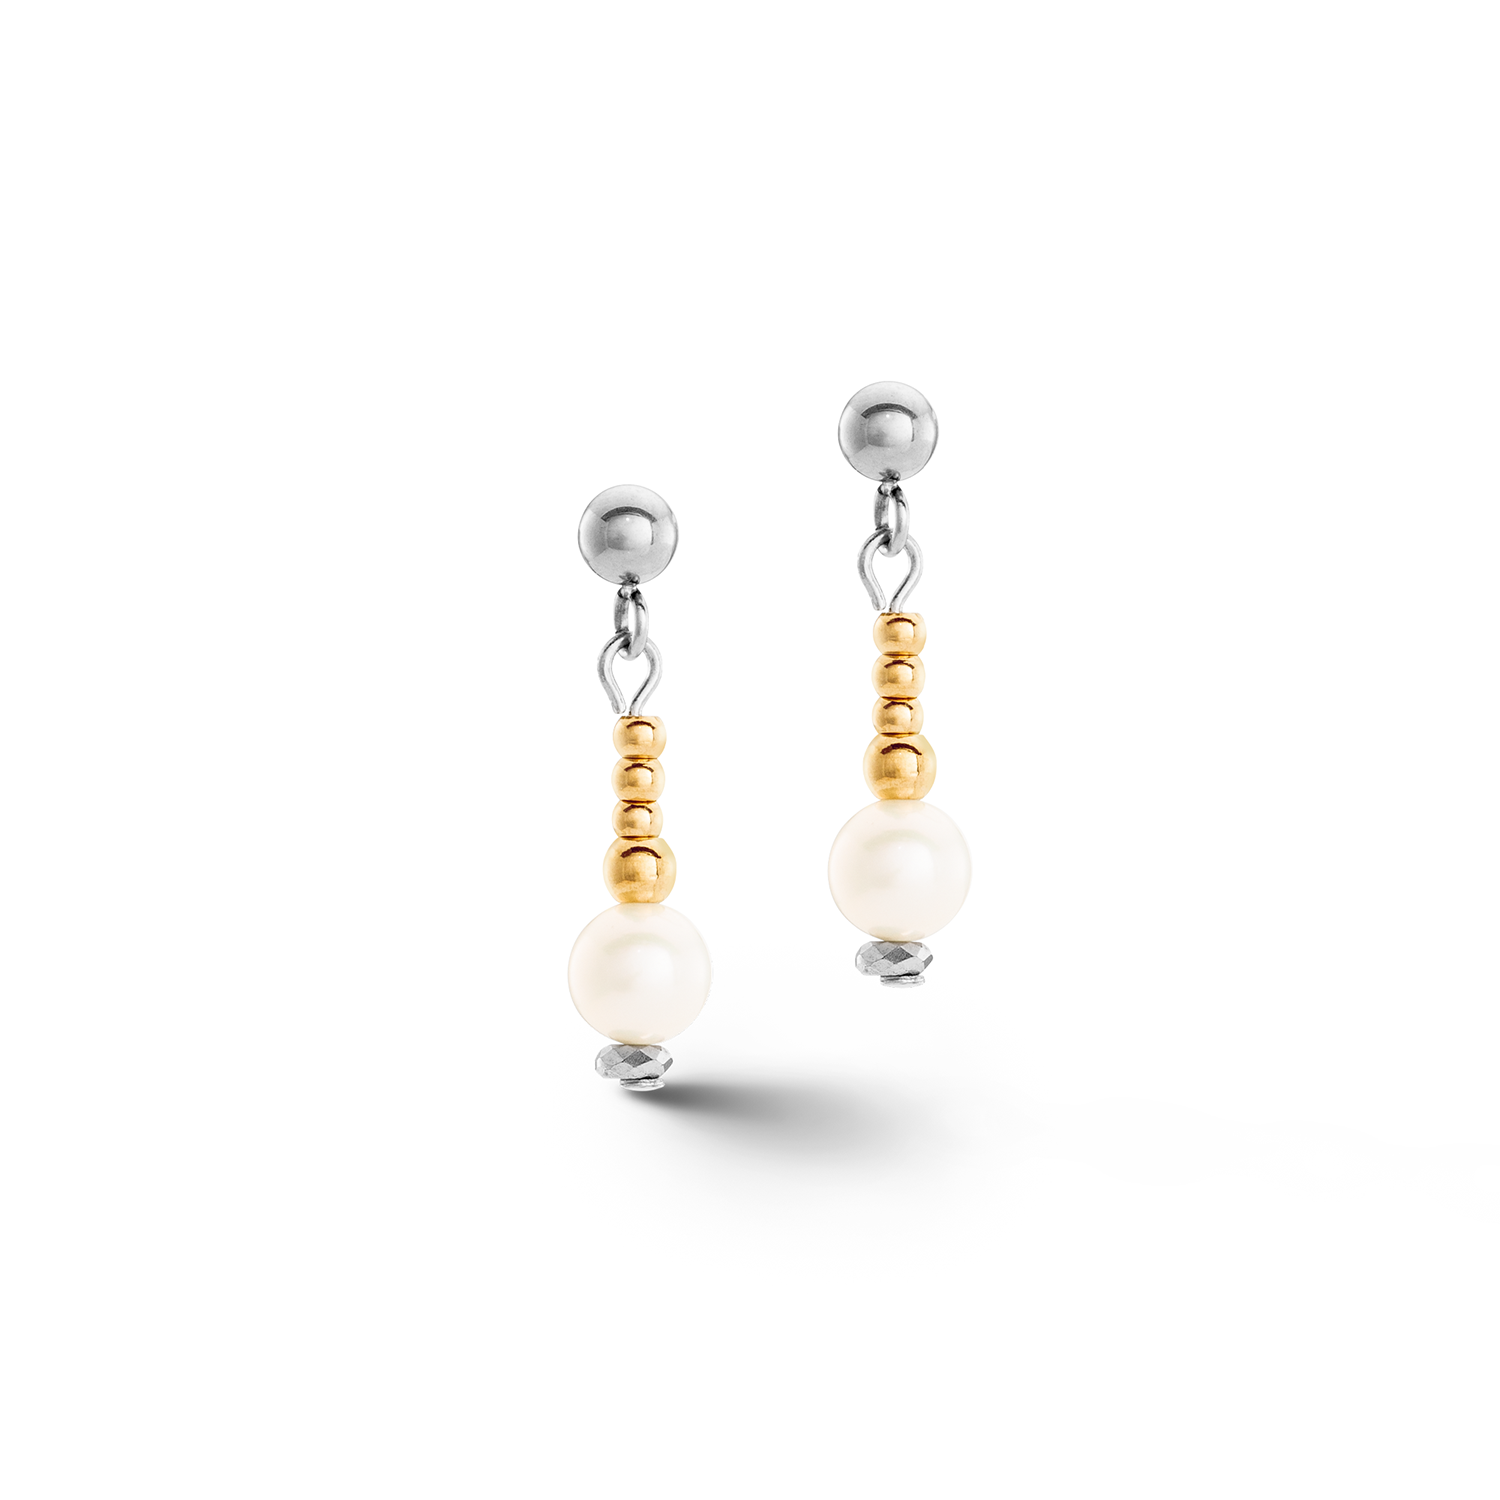 Freshwater Pearls, Stainless Steel with Gold Earrings 1117/21_1426